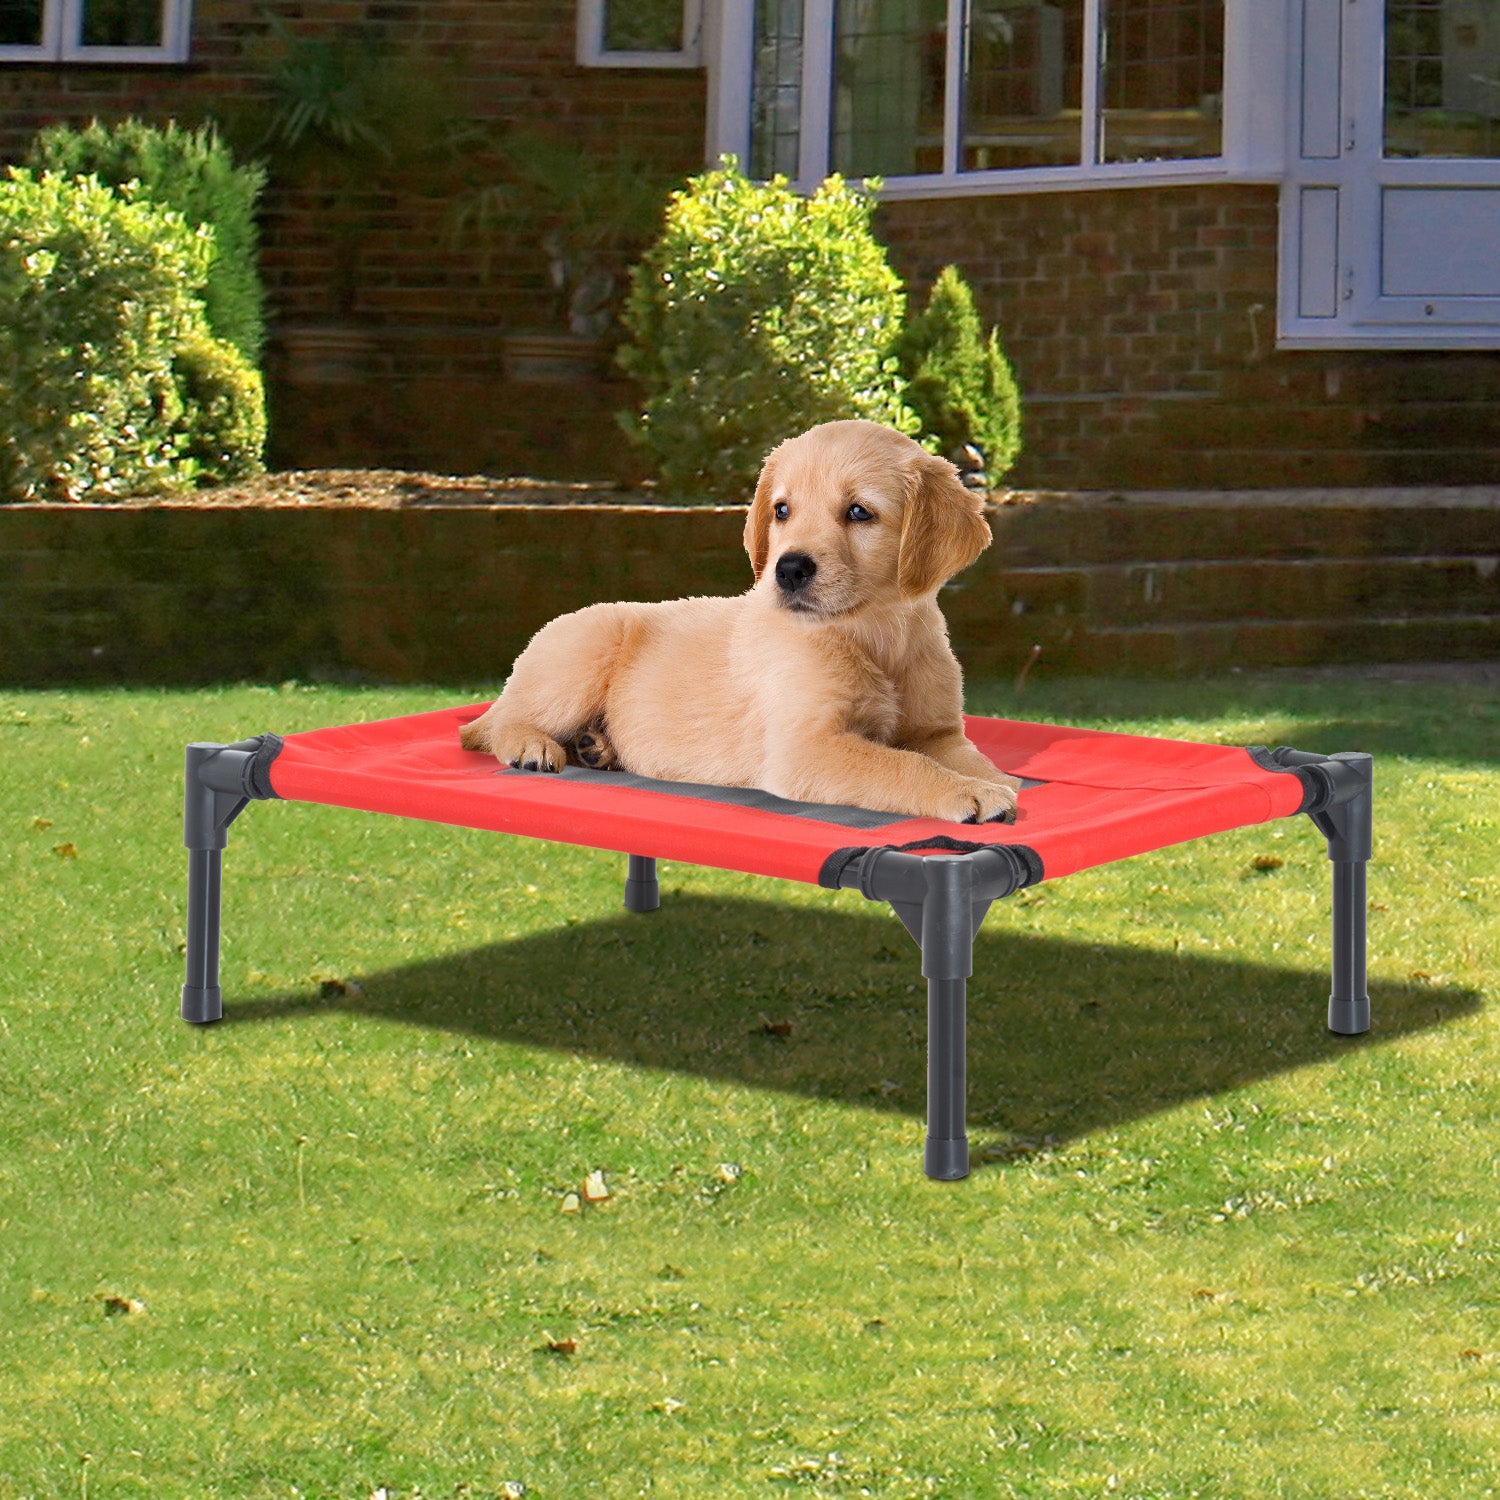 PawHut Elevated Pet Bed Portable Camping Raised Dog Bed w/ Metal Frame Black and Red (Small) - Inspirely